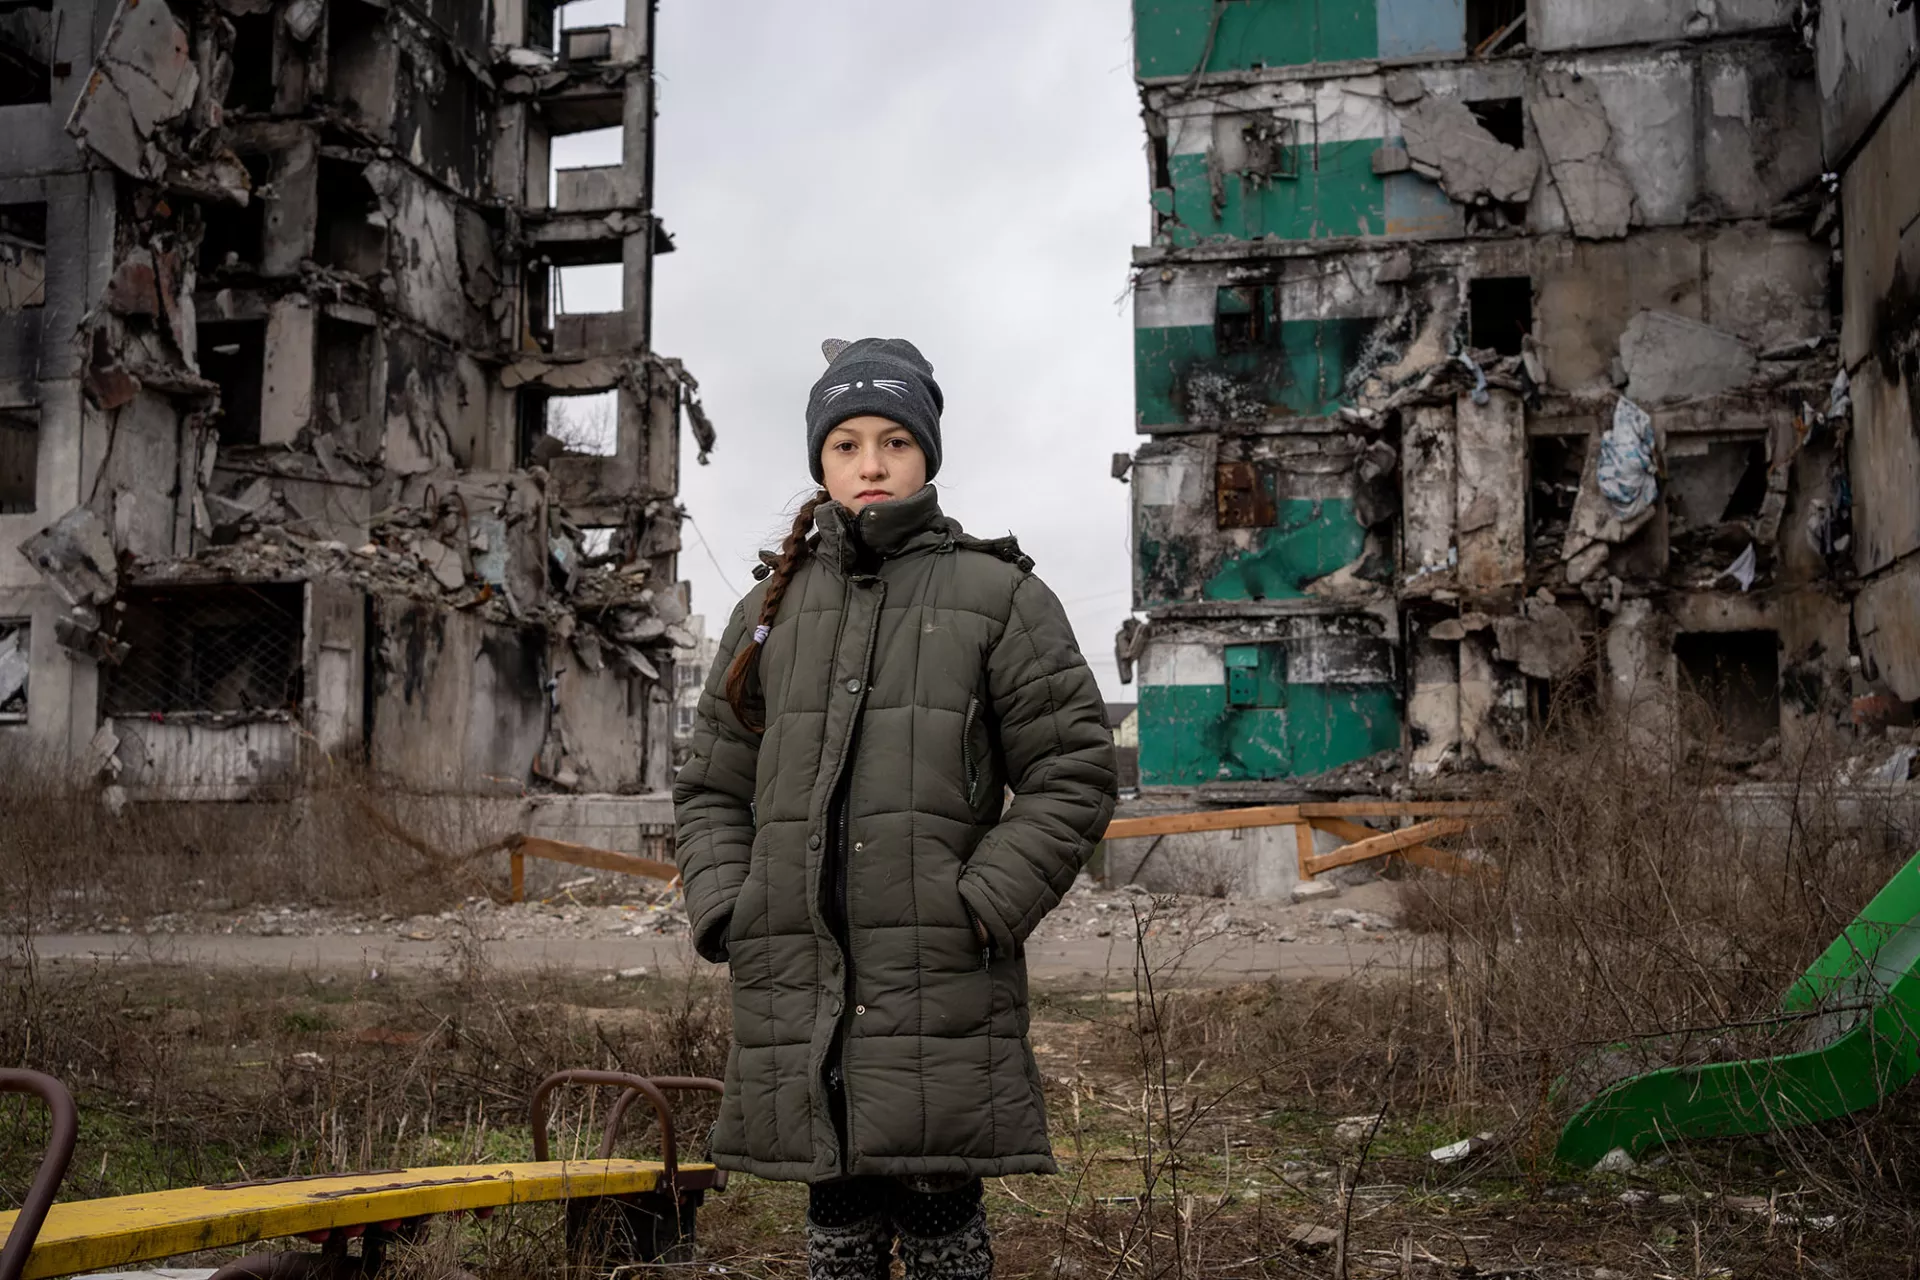 On January 30, 2023, 10-year-old Veronica visits the ruins of a high-rise building in the centre of Borodianka, Ukraine to feed three street cats.